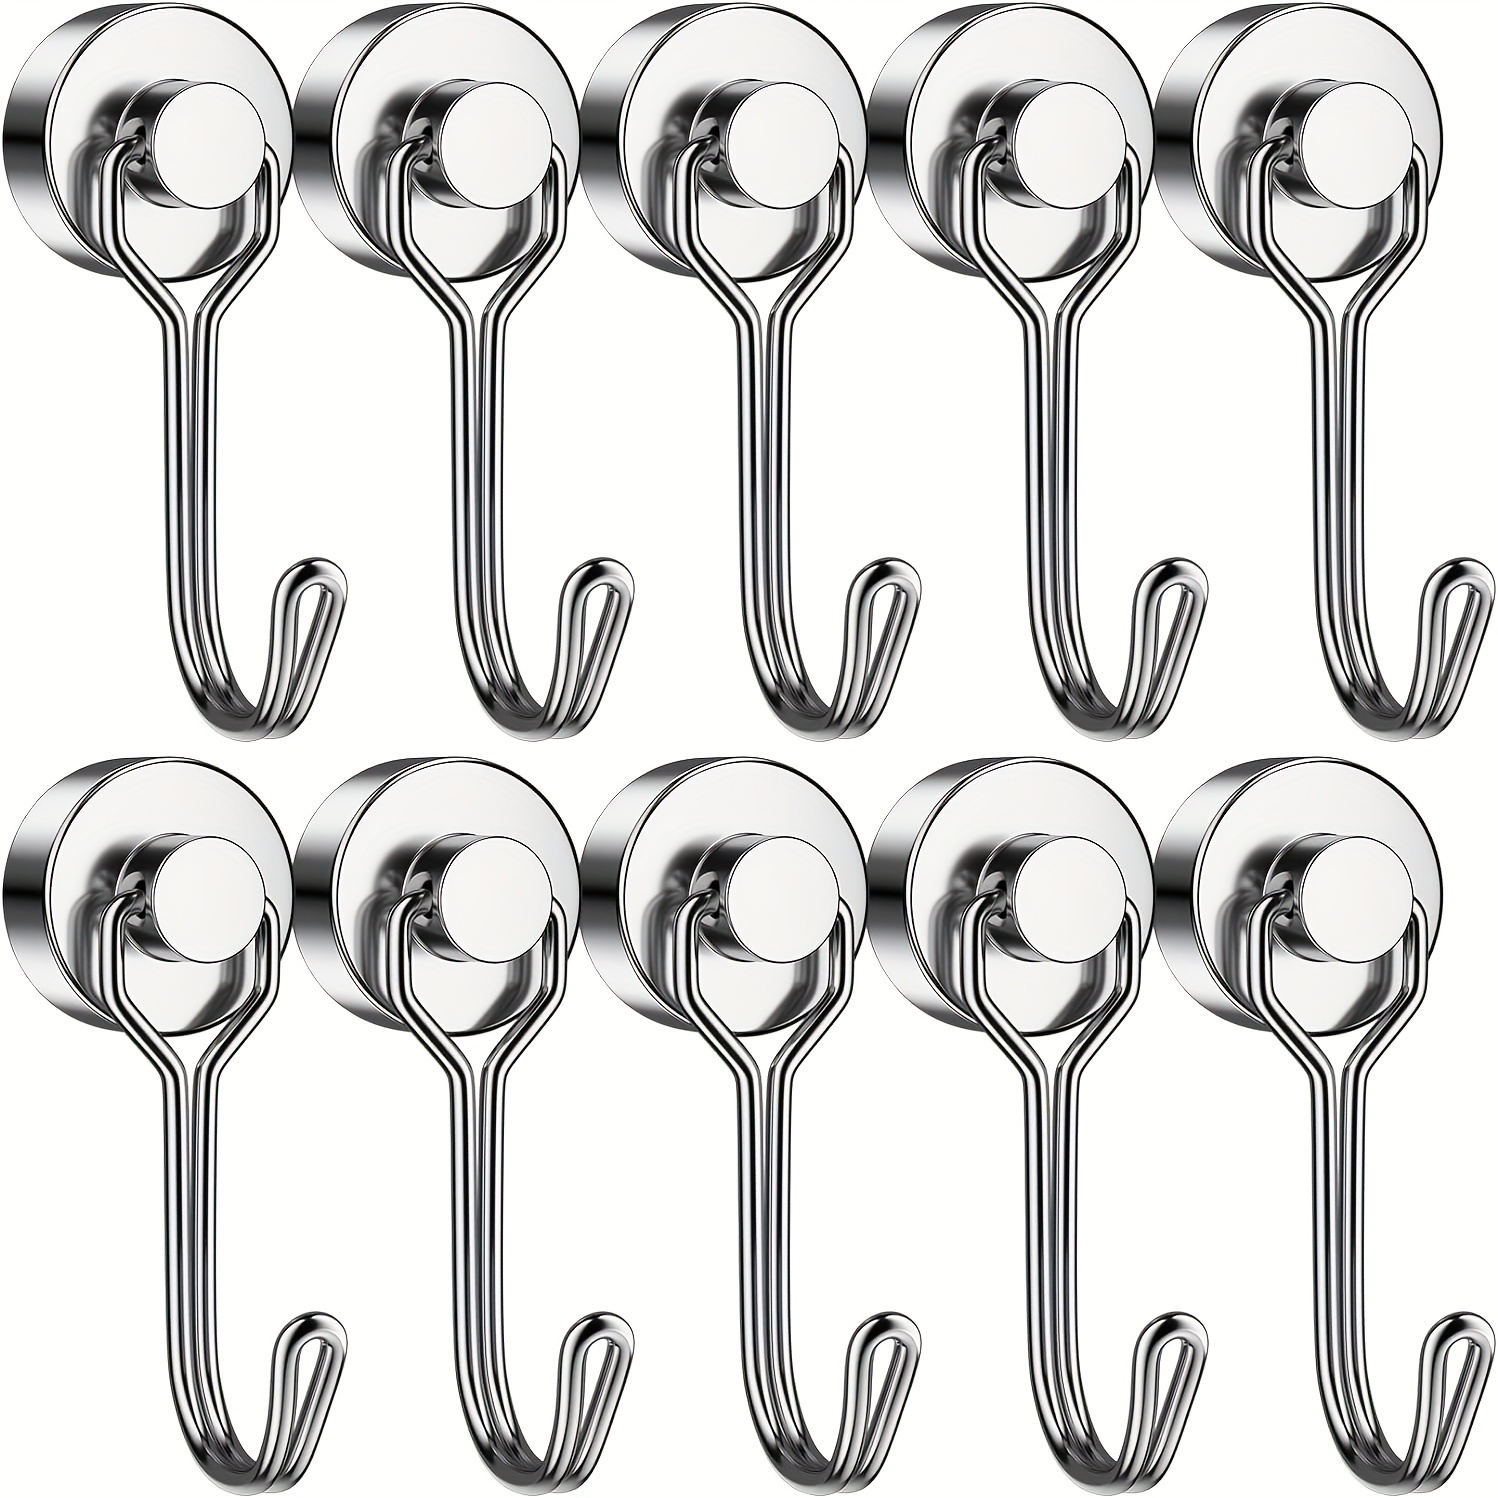 

10 Pack Heavy Duty Magnetic Hooks, 25lb Neodymium Rotatable Door Mount Metal Hooks With Polished Finish, Foldable And Adjustable For Kitchen, Camping, Locker